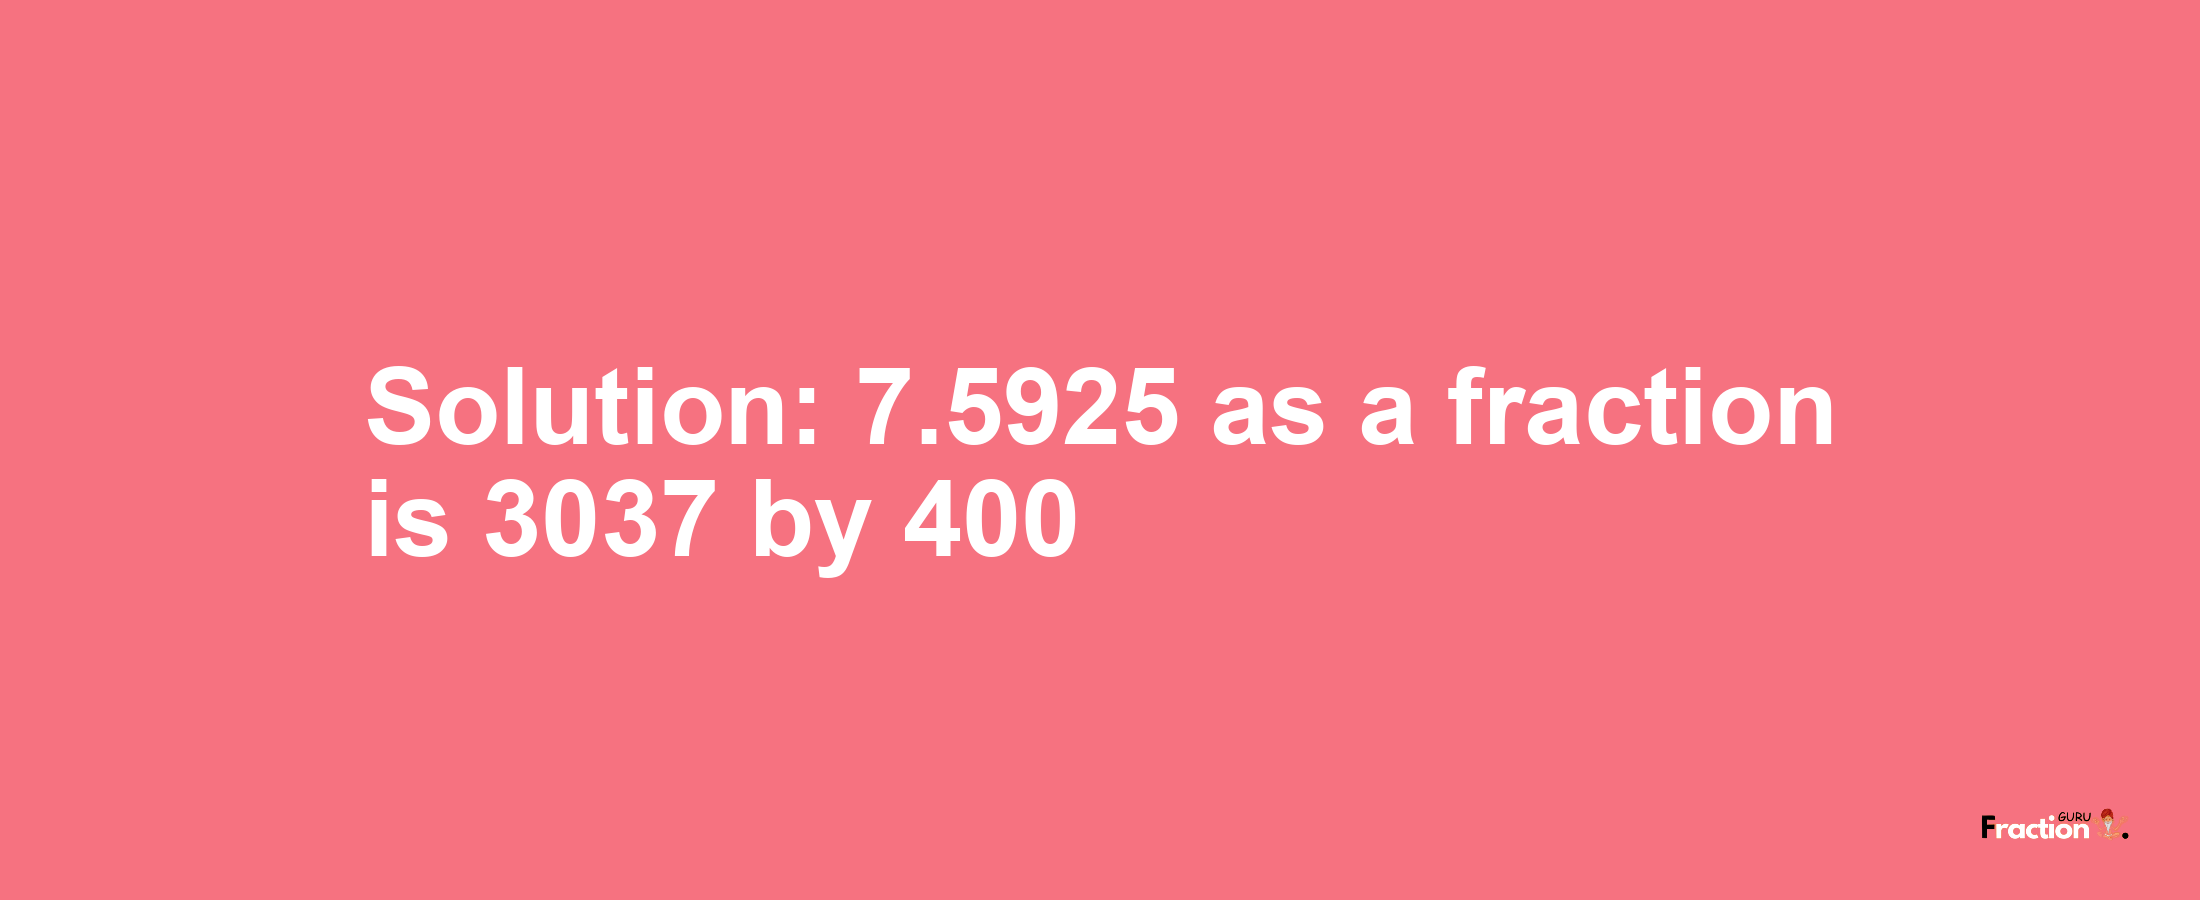 Solution:7.5925 as a fraction is 3037/400